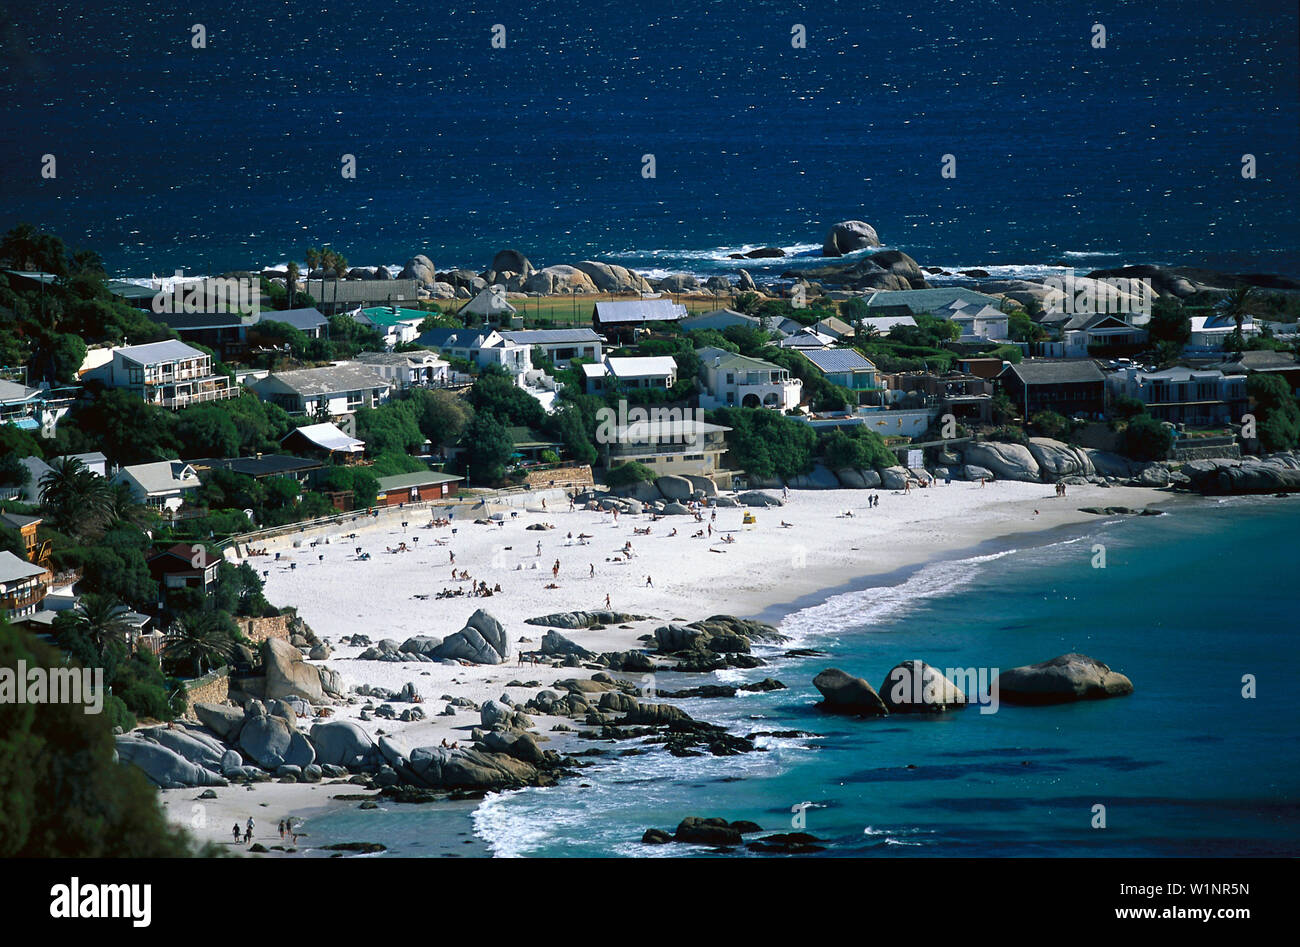 Clifton Bay, Cape Town South Africa Stock Photo